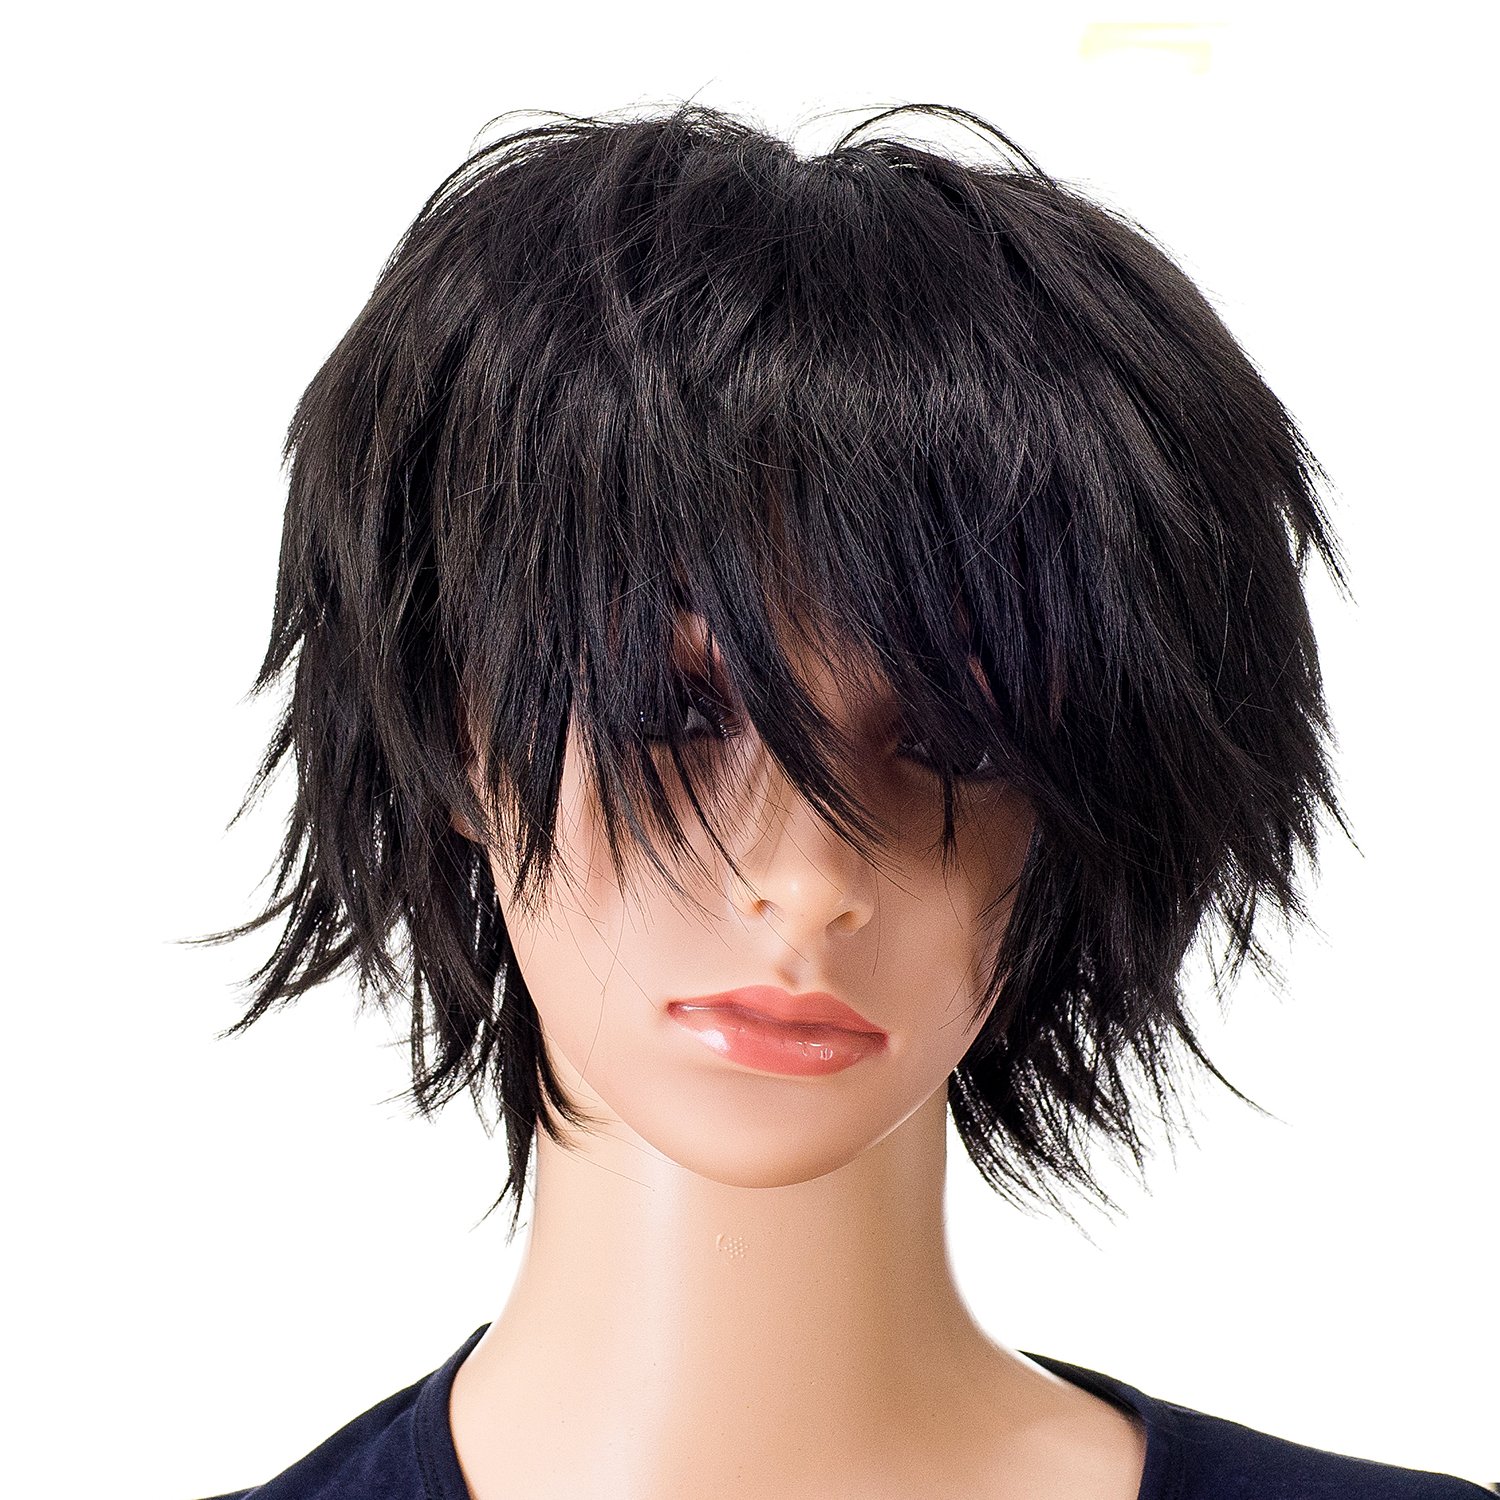 Price:$9.99    SWACC Unisex Fashion Spiky Layered Short Anime Cosplay Wig for Men and Women (1B-Off Black)  Beauty